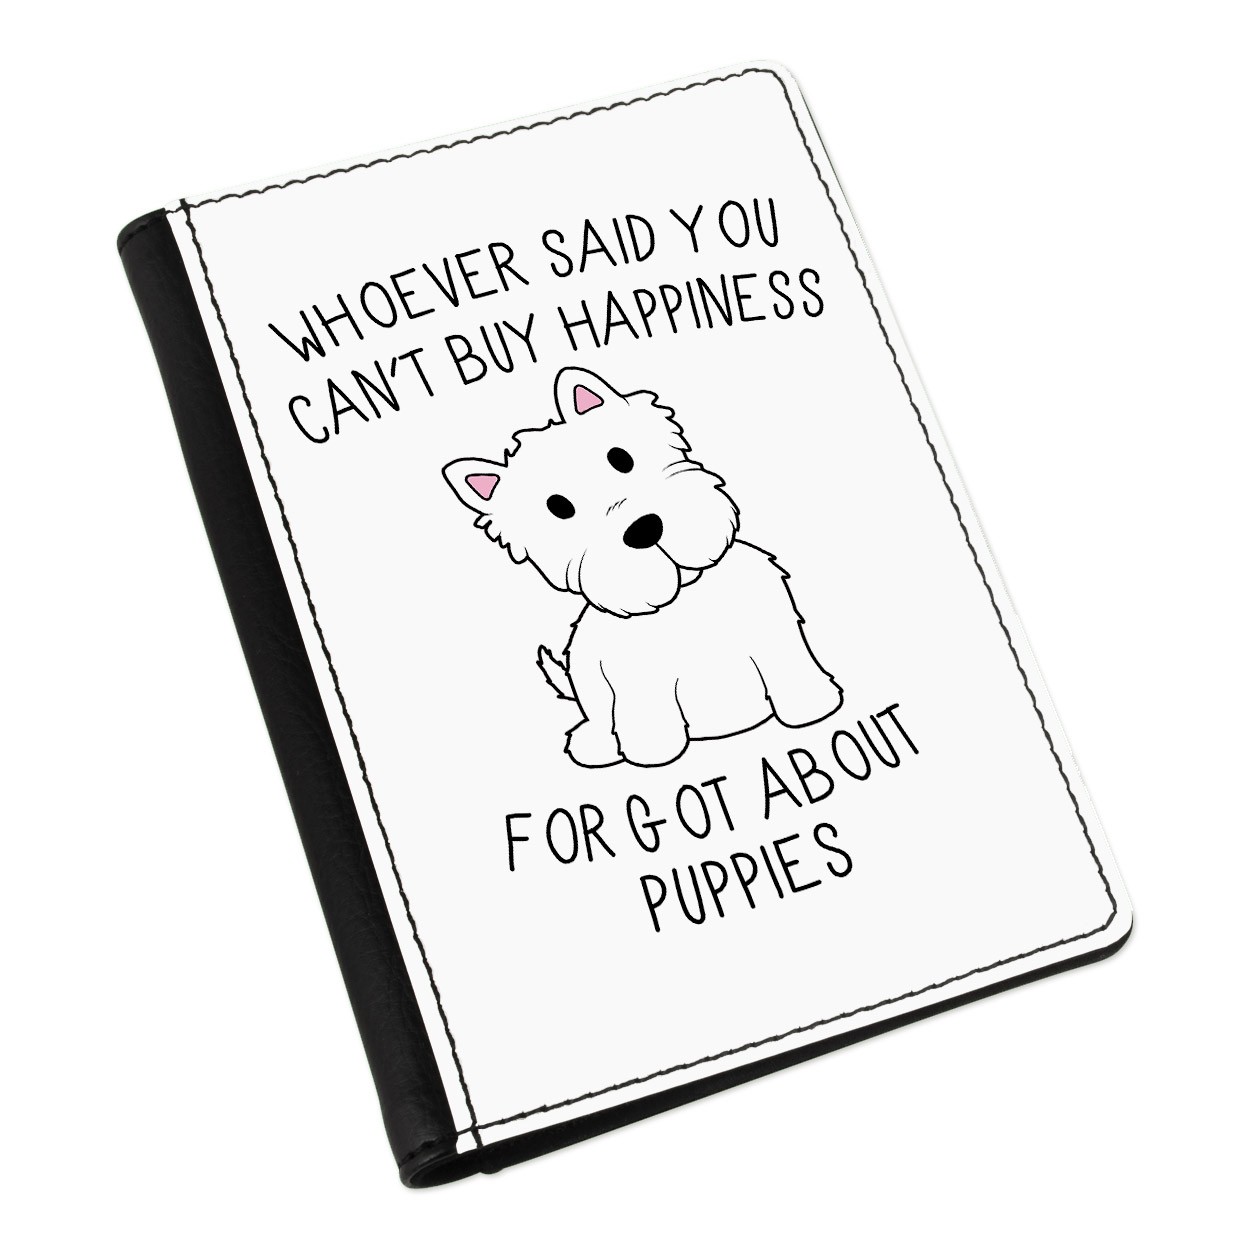 Whoever Said You Can't Buy Happiness Forgot About Puppies Passport Holder Cover